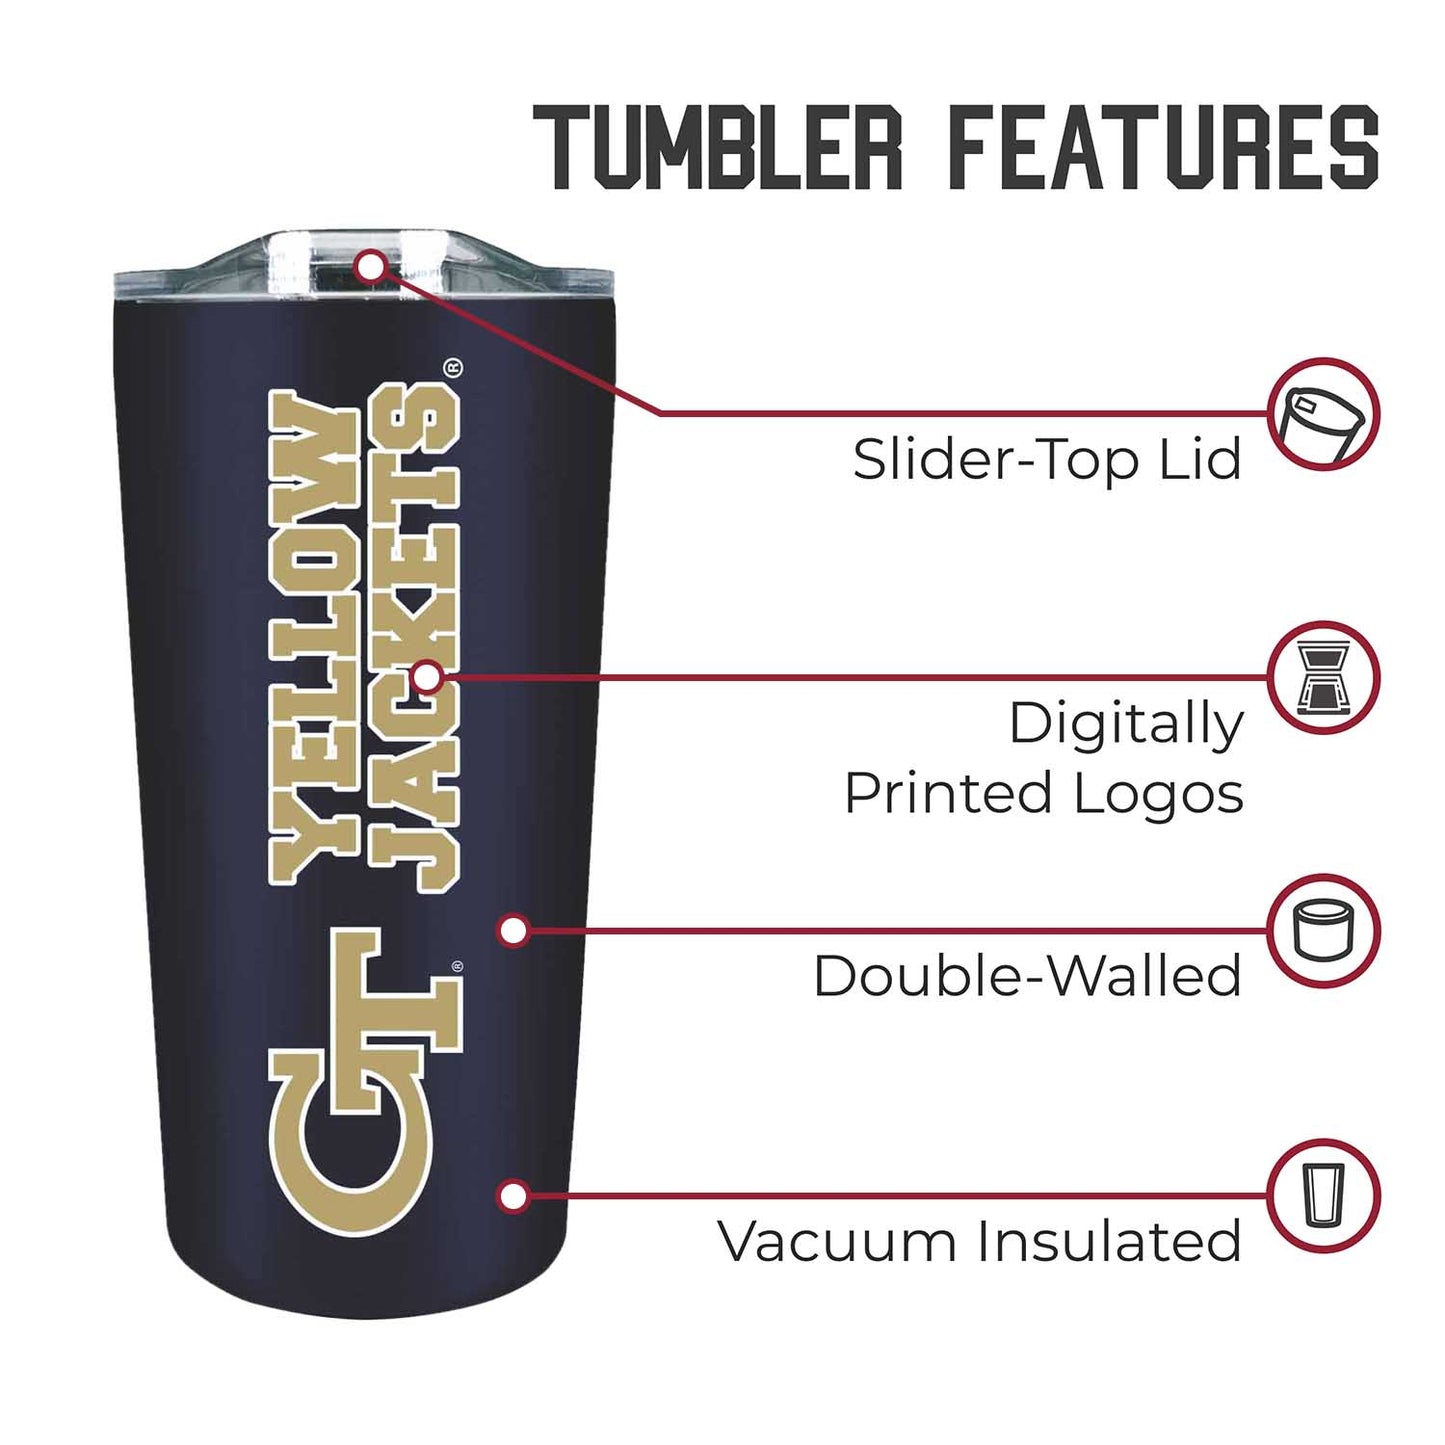 Georgia Tech Yellowjackets NCAA Stainless Steel Tumbler perfect for Gameday - Navy